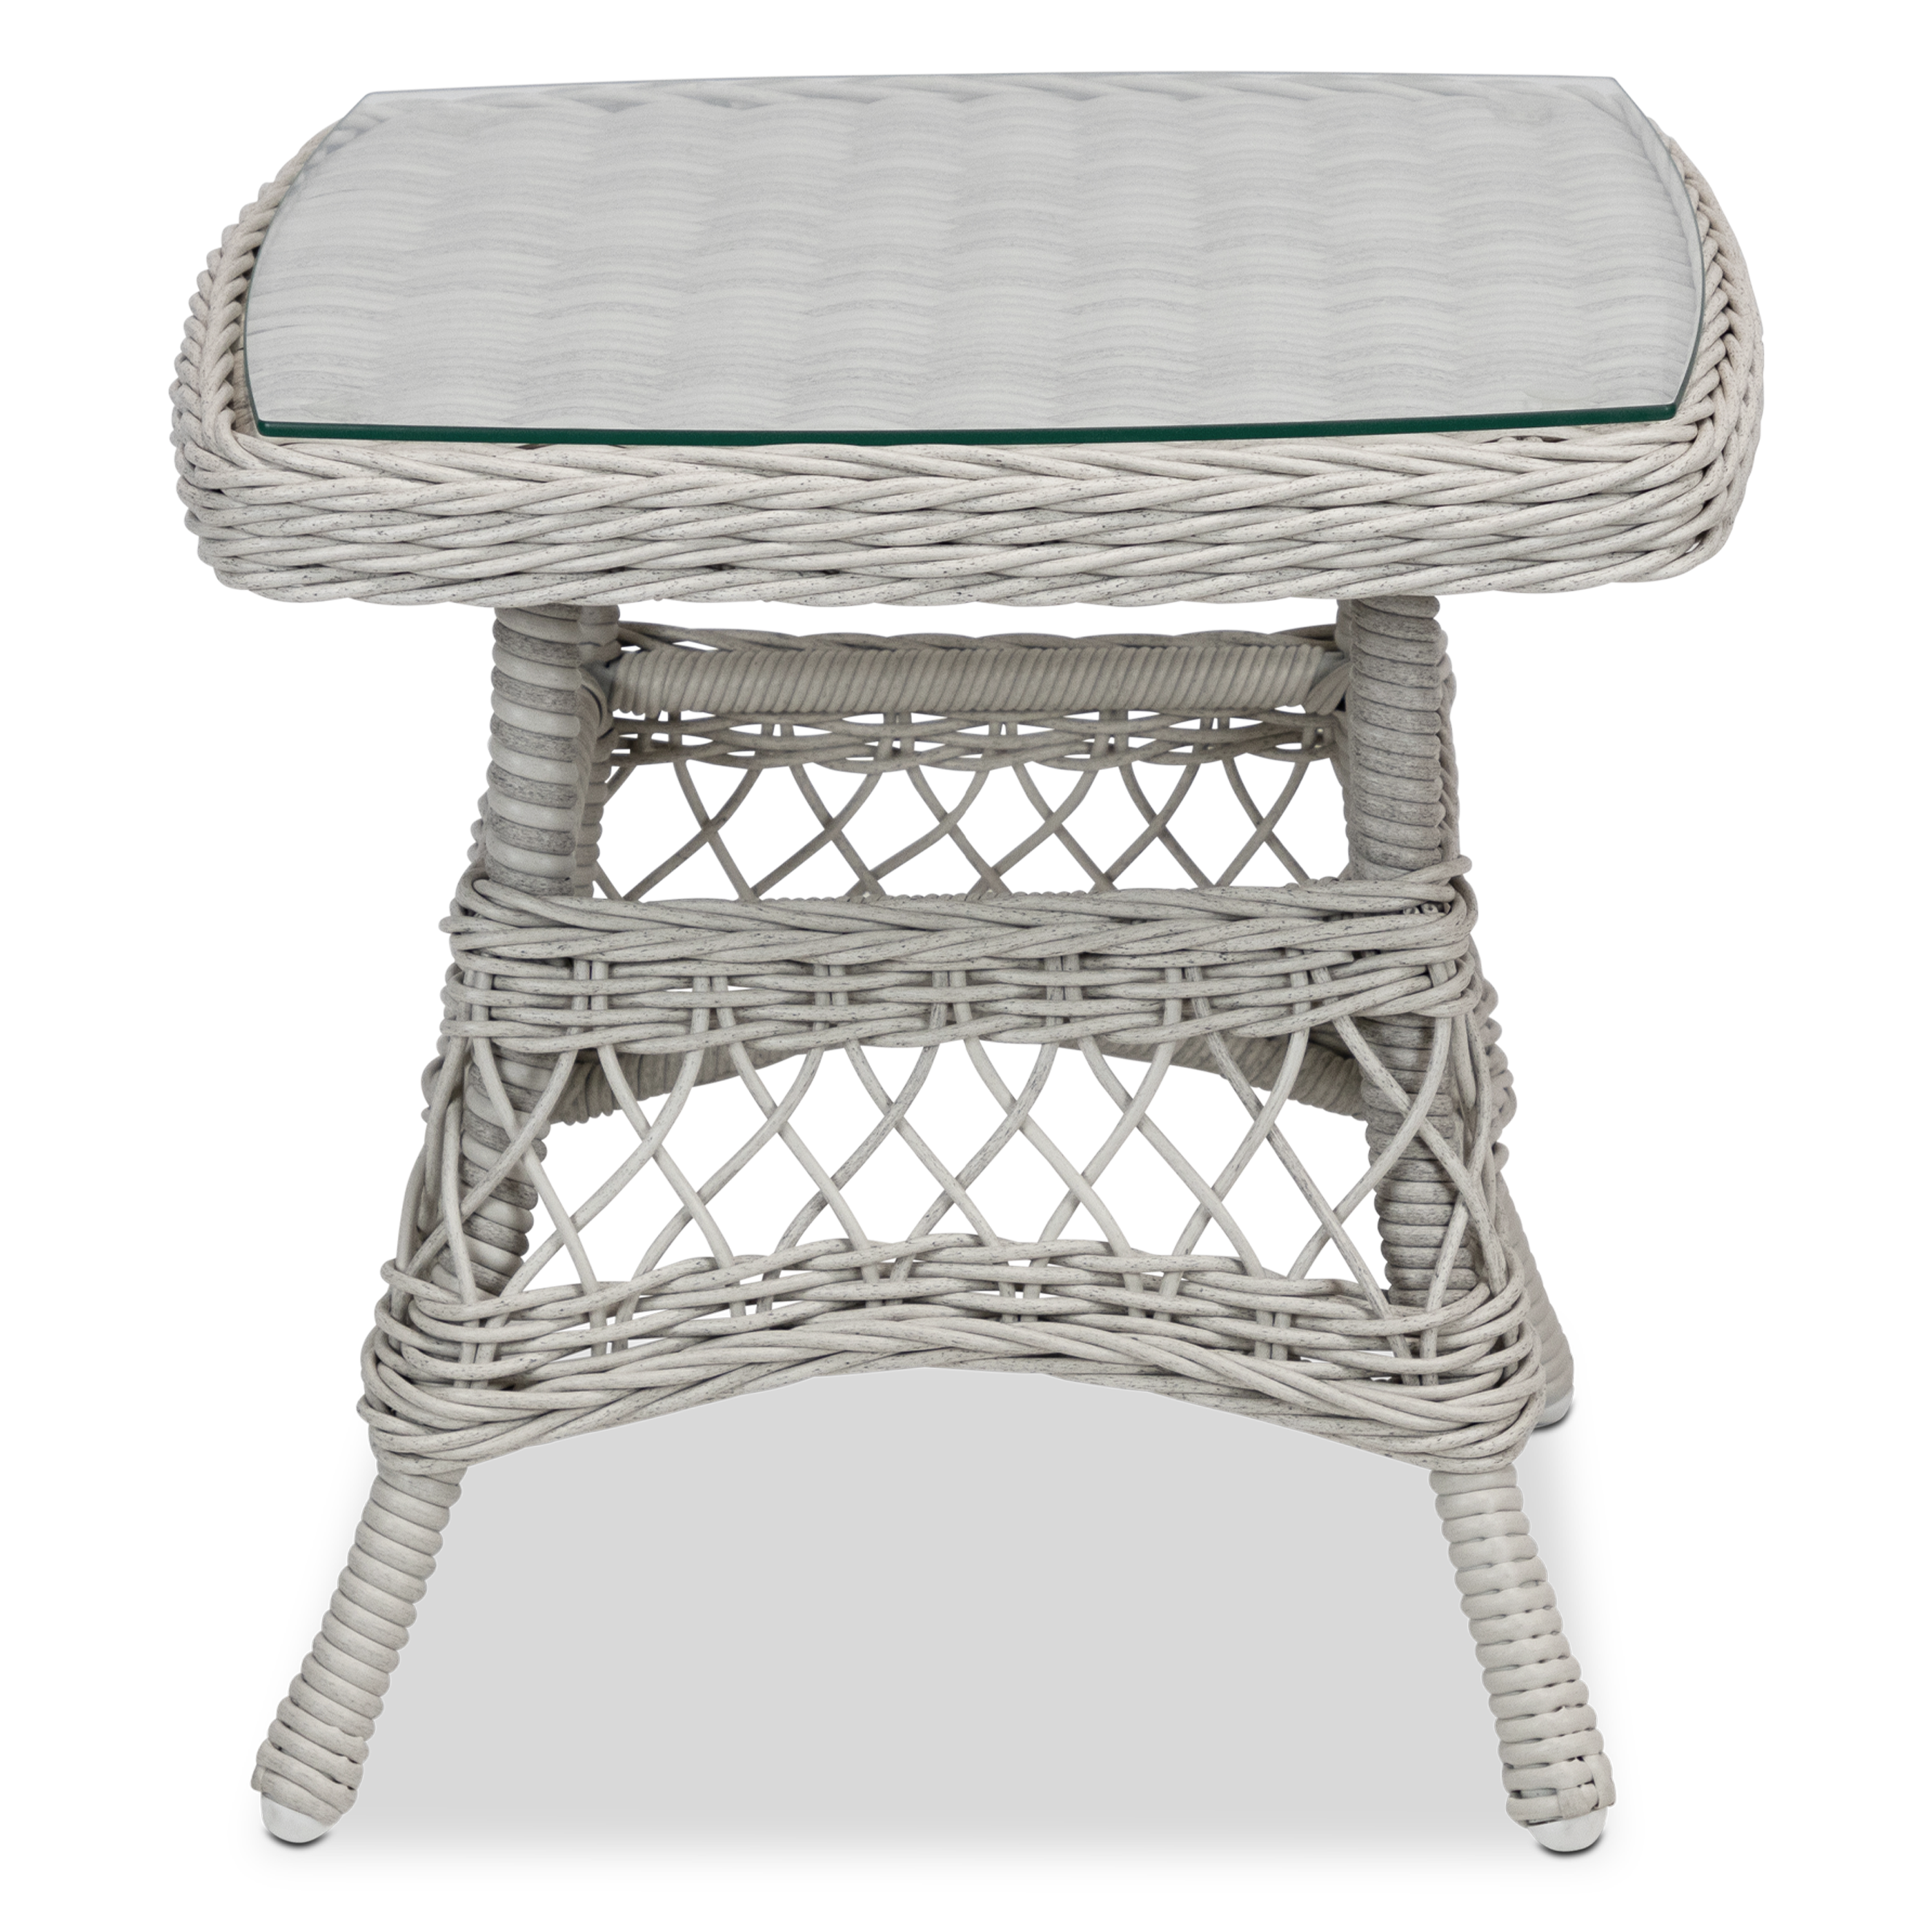 Hamptons Side Table in Surfmist Wicker with Glass Top